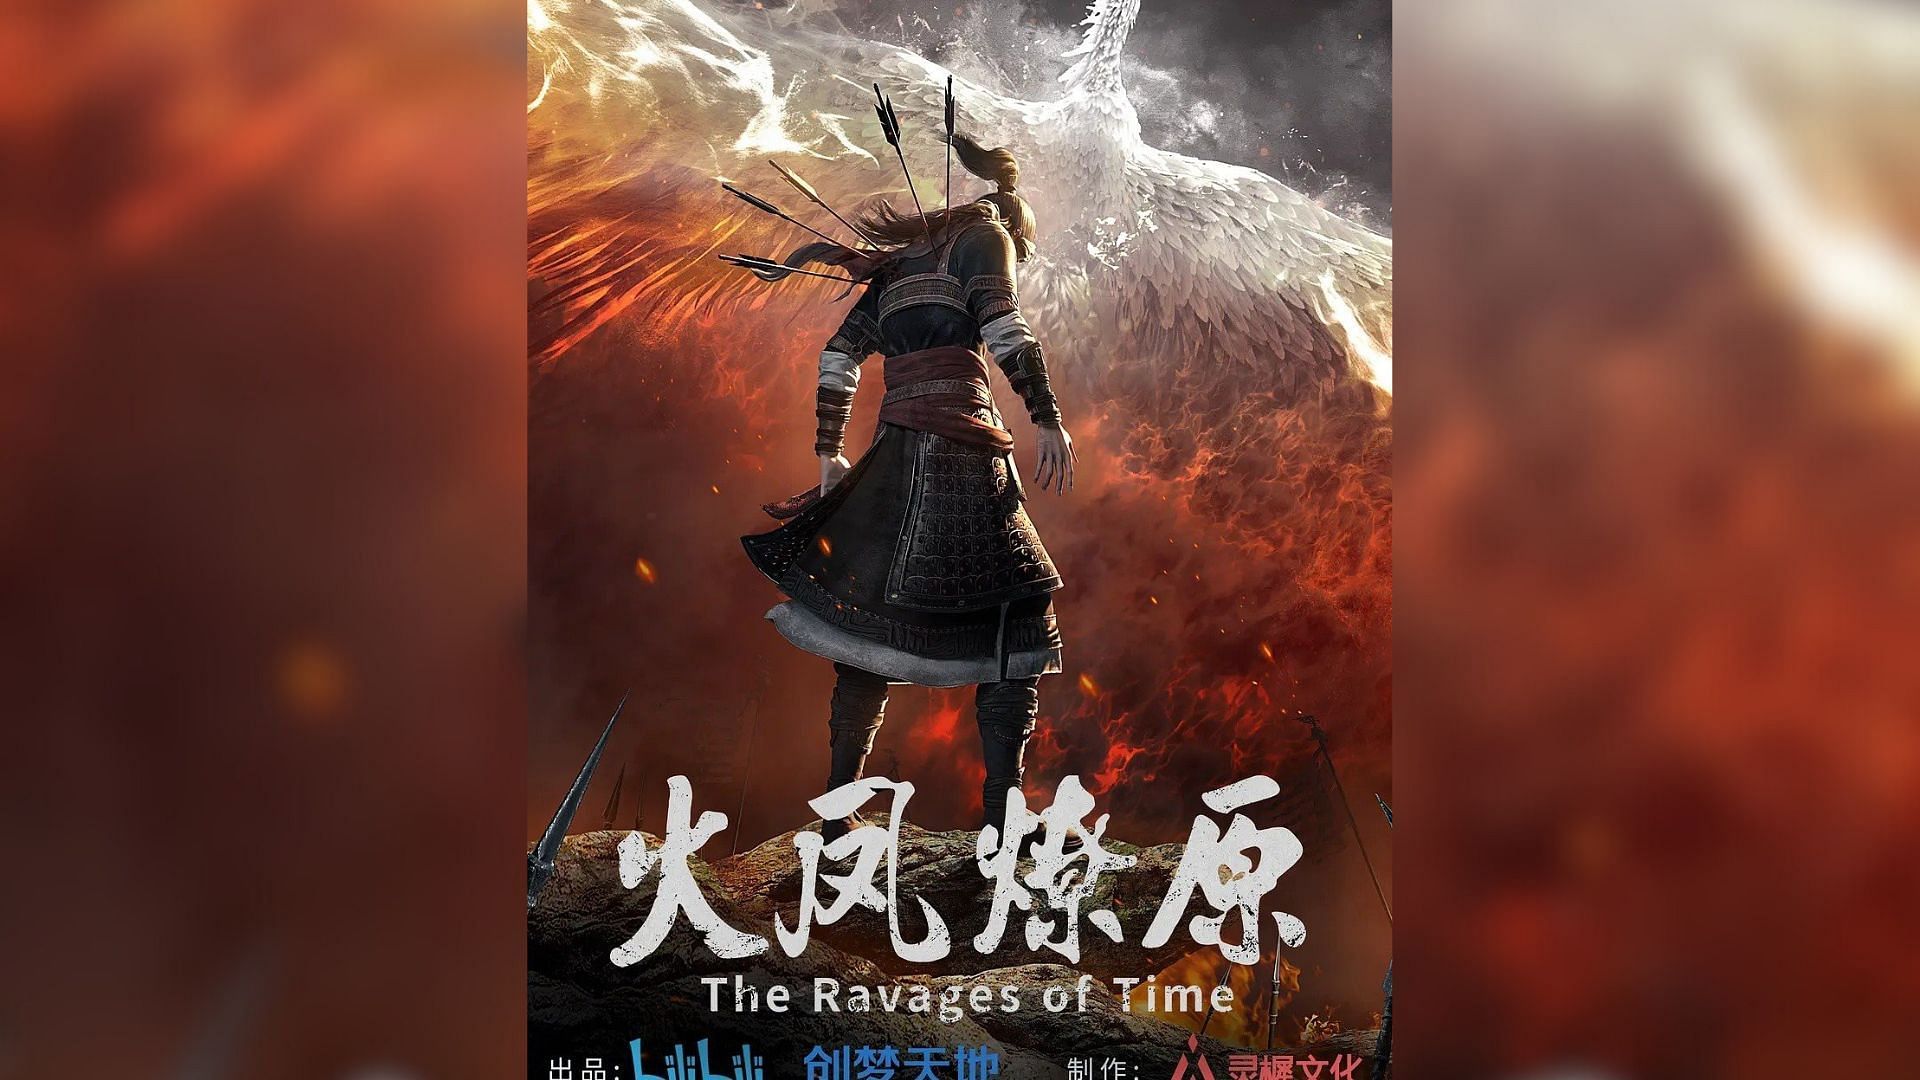 Cover of Ravages of Time (Image via Chan Mou)